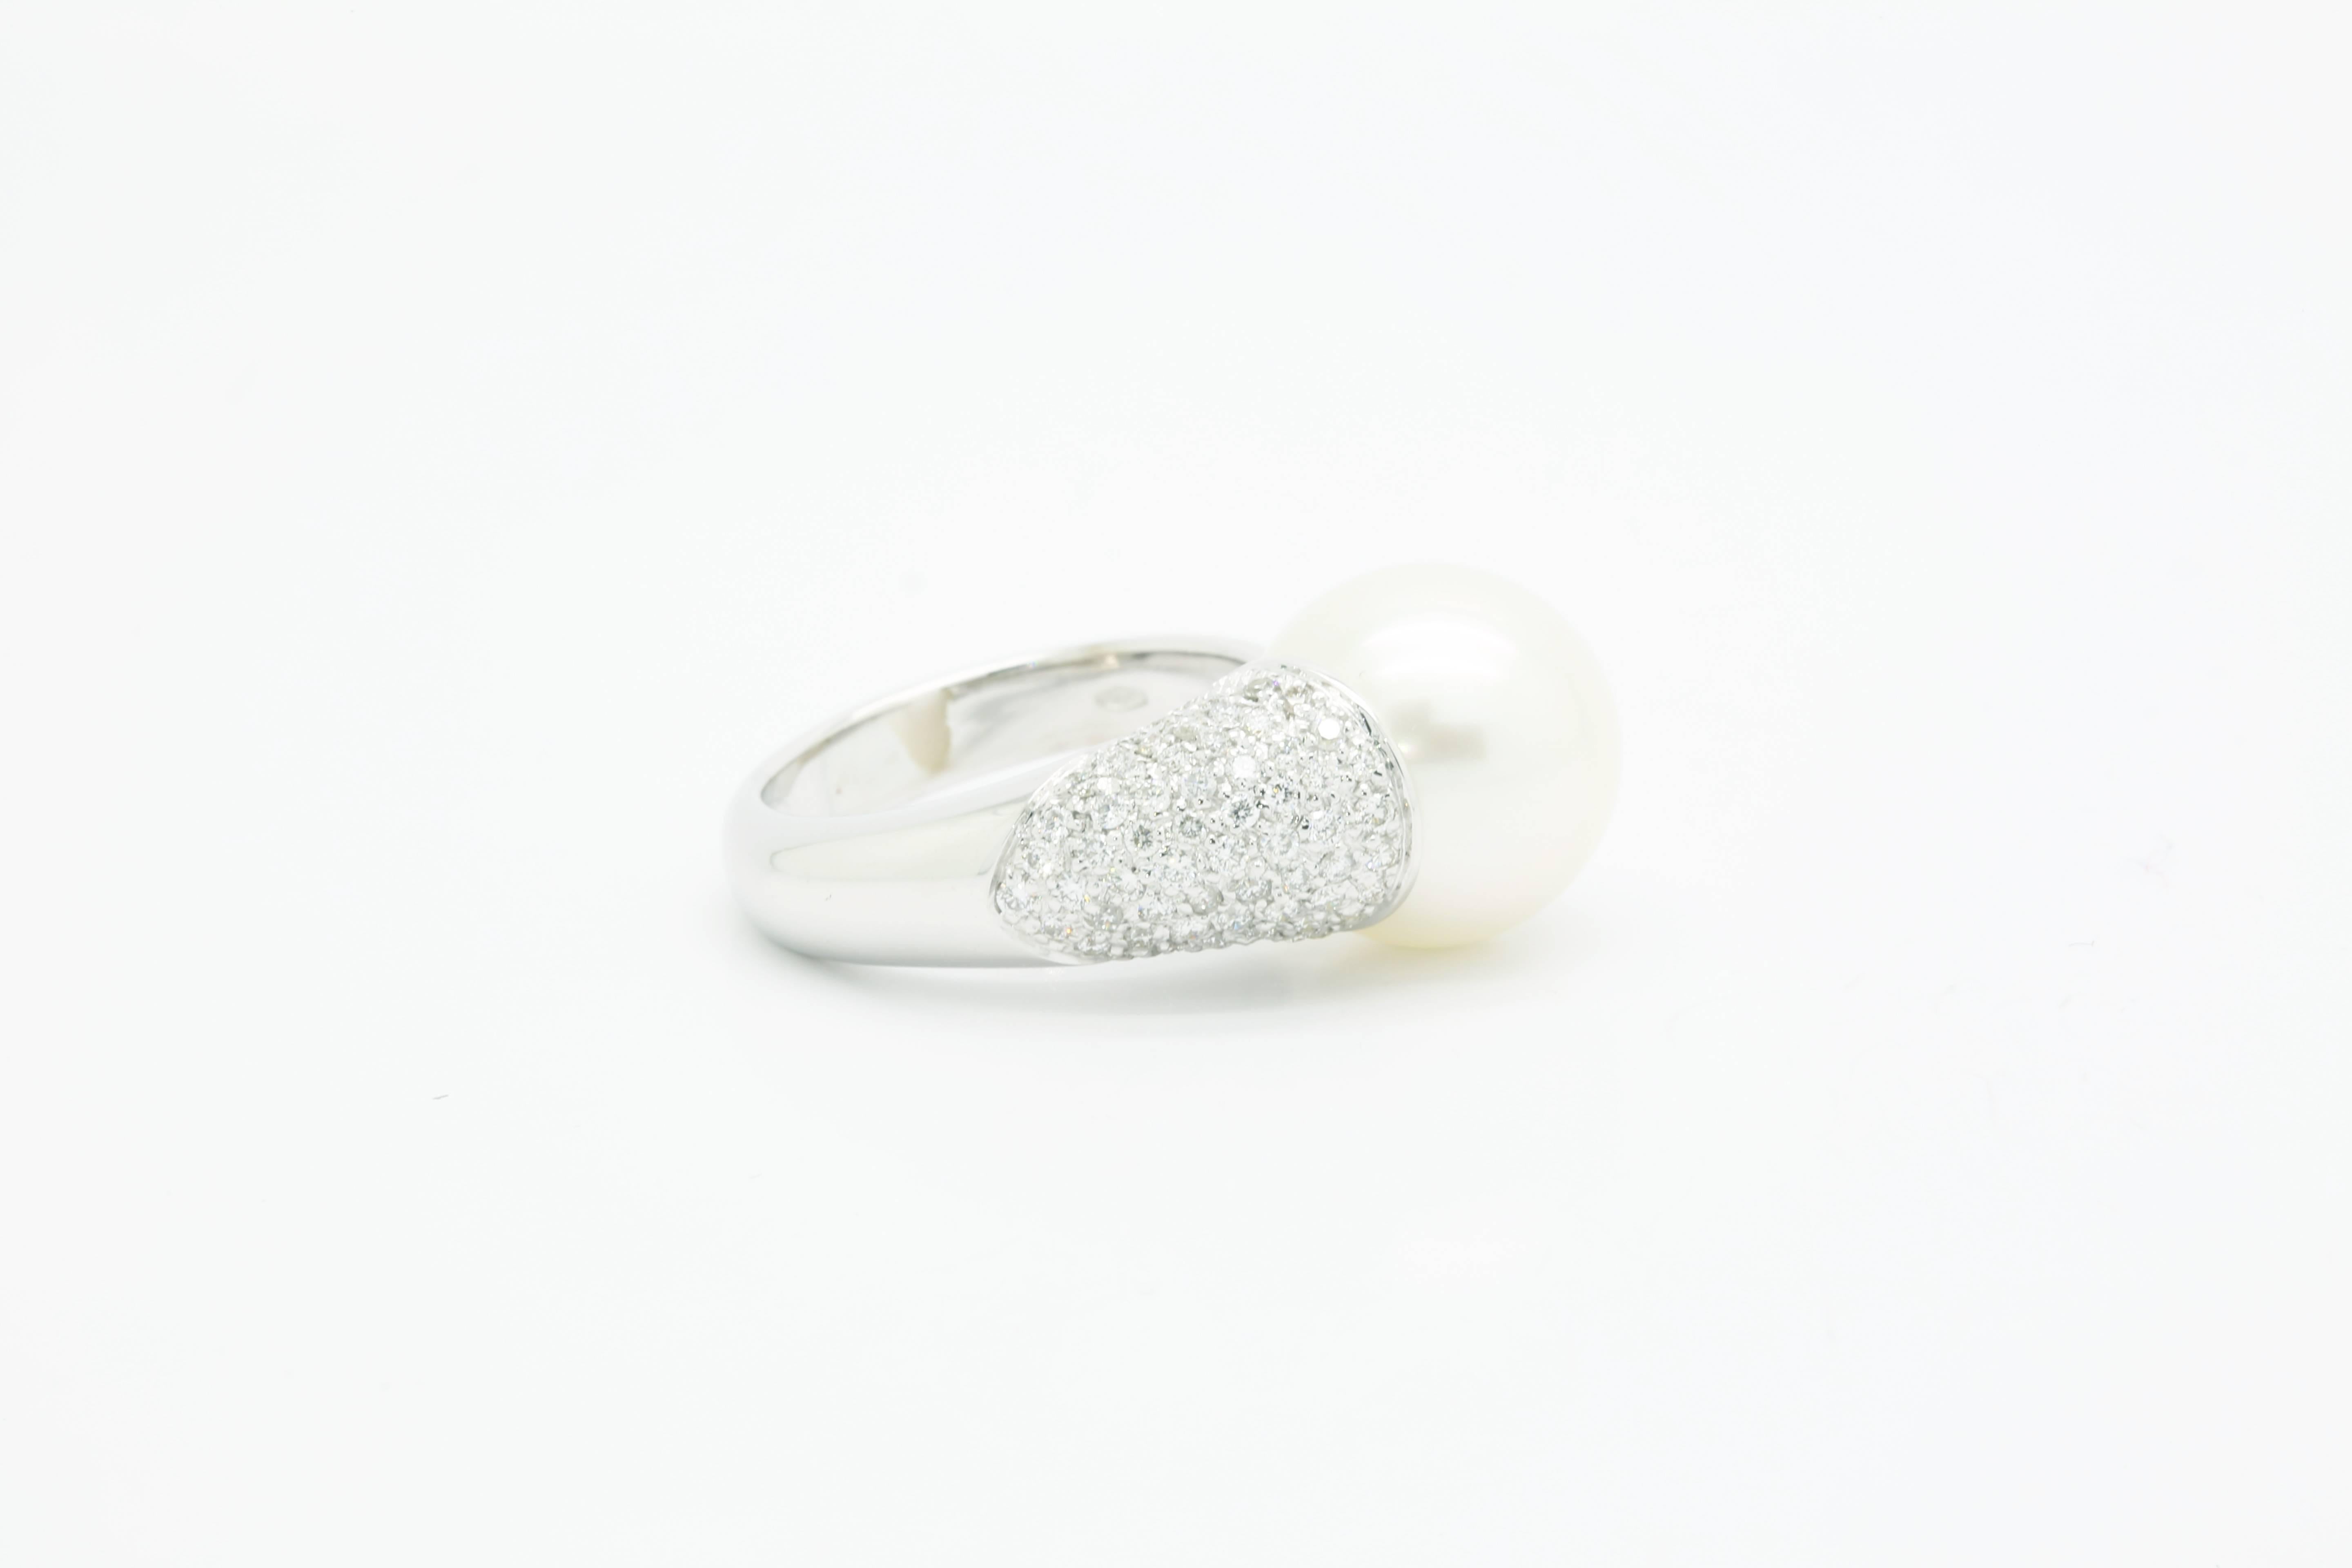 A white Australian pearl and white diamonds ring, FERRUCCI in a contemporary ring design to compliment the delicate unique class of a sophisticated woman, cherished as symbols of purity and perfection, elegance and affluence.

Entirely made in 18k